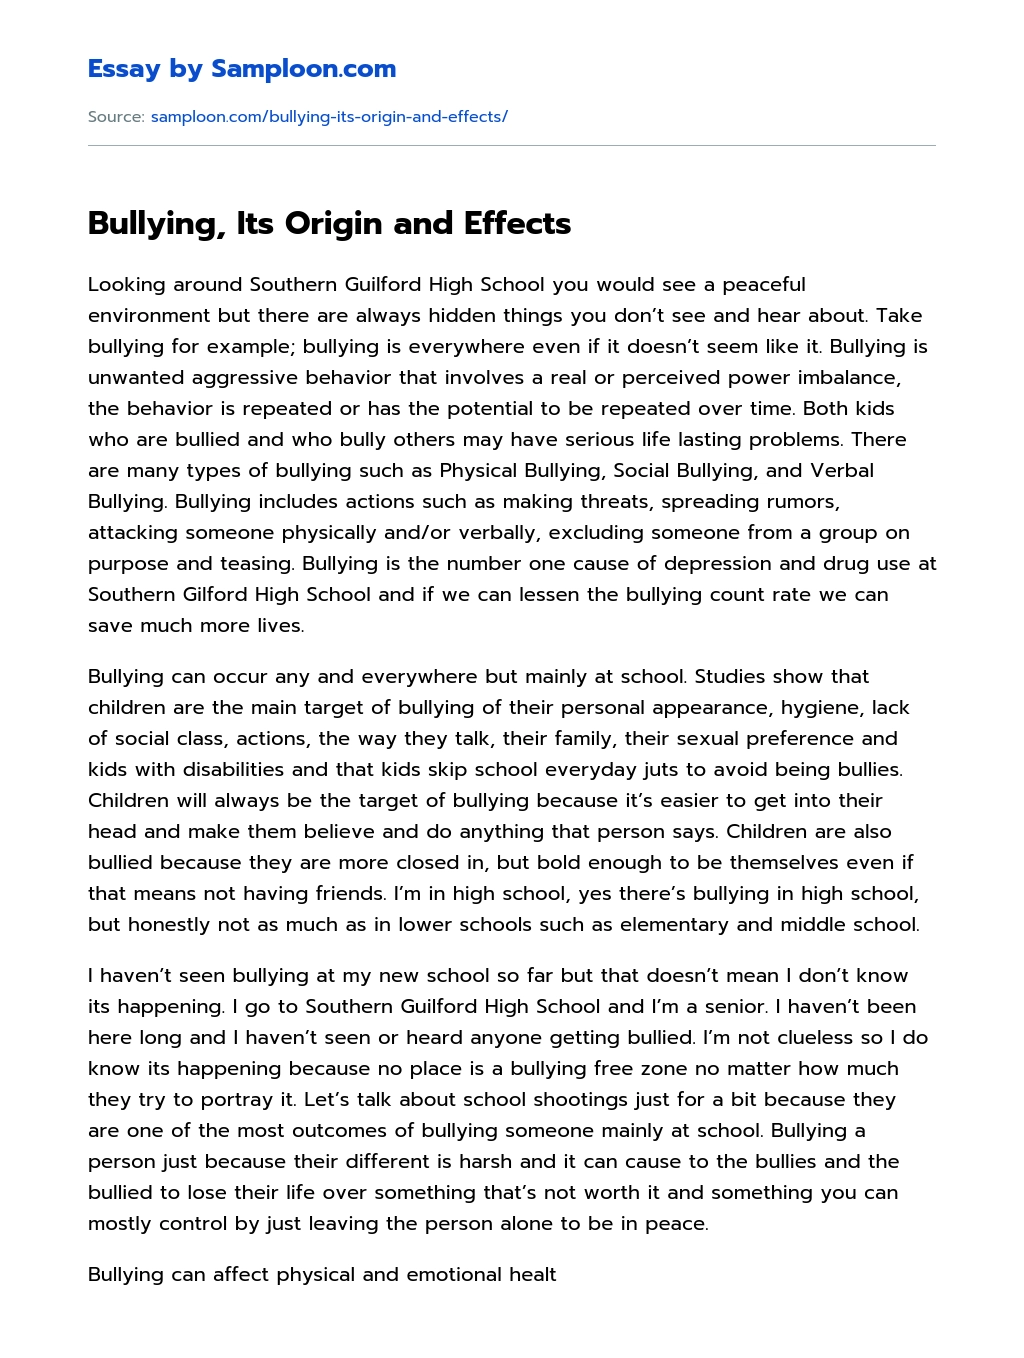 Bullying, Its Origin and Effects essay